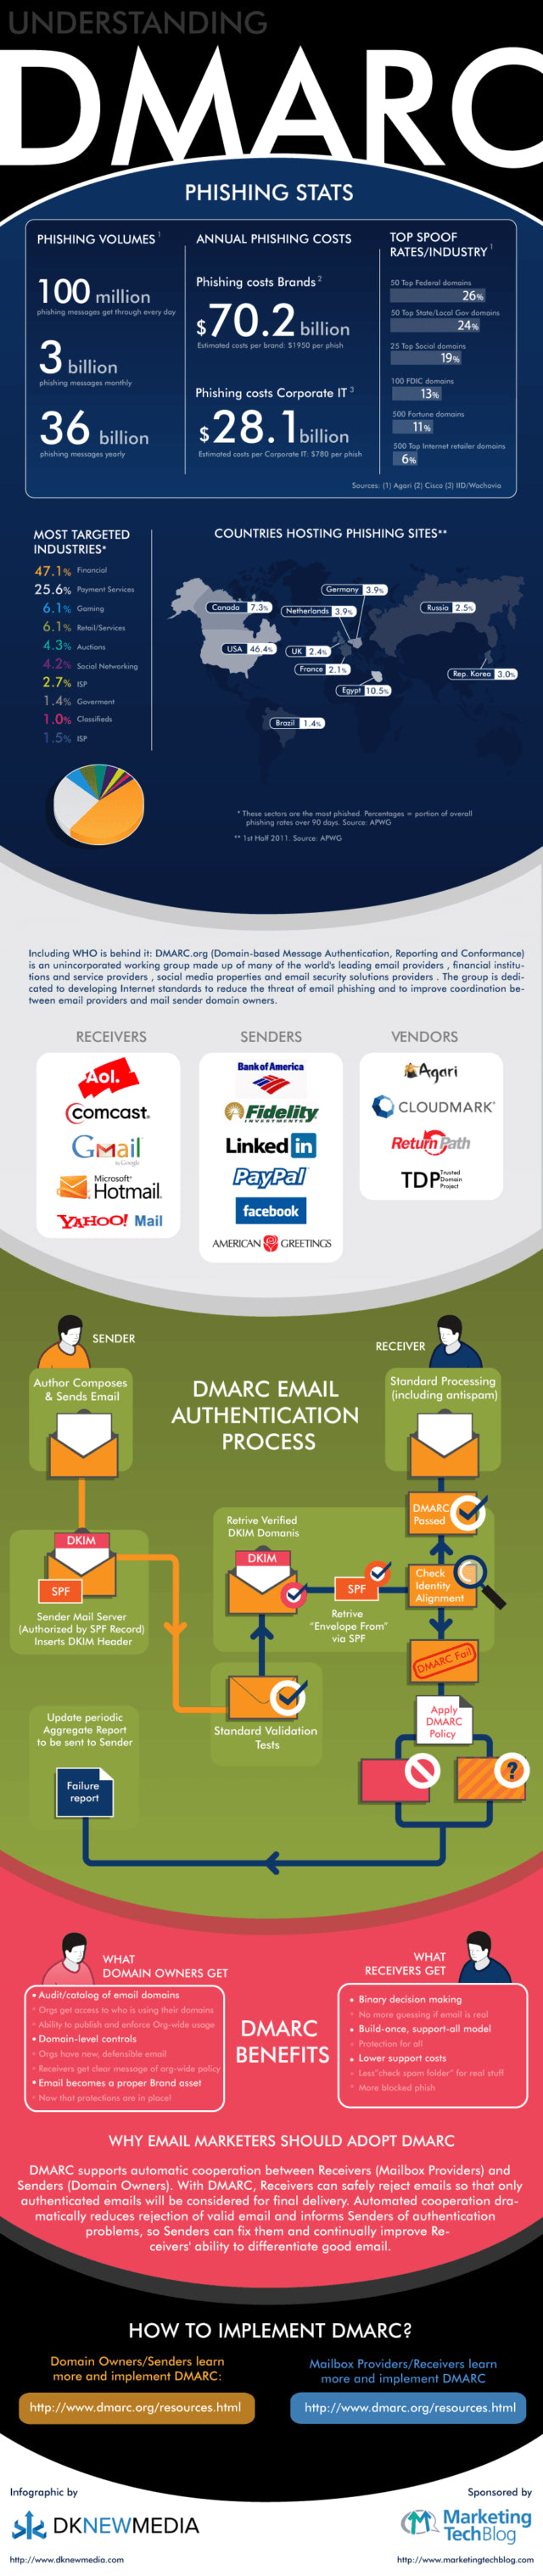 How Does DMARC Work?